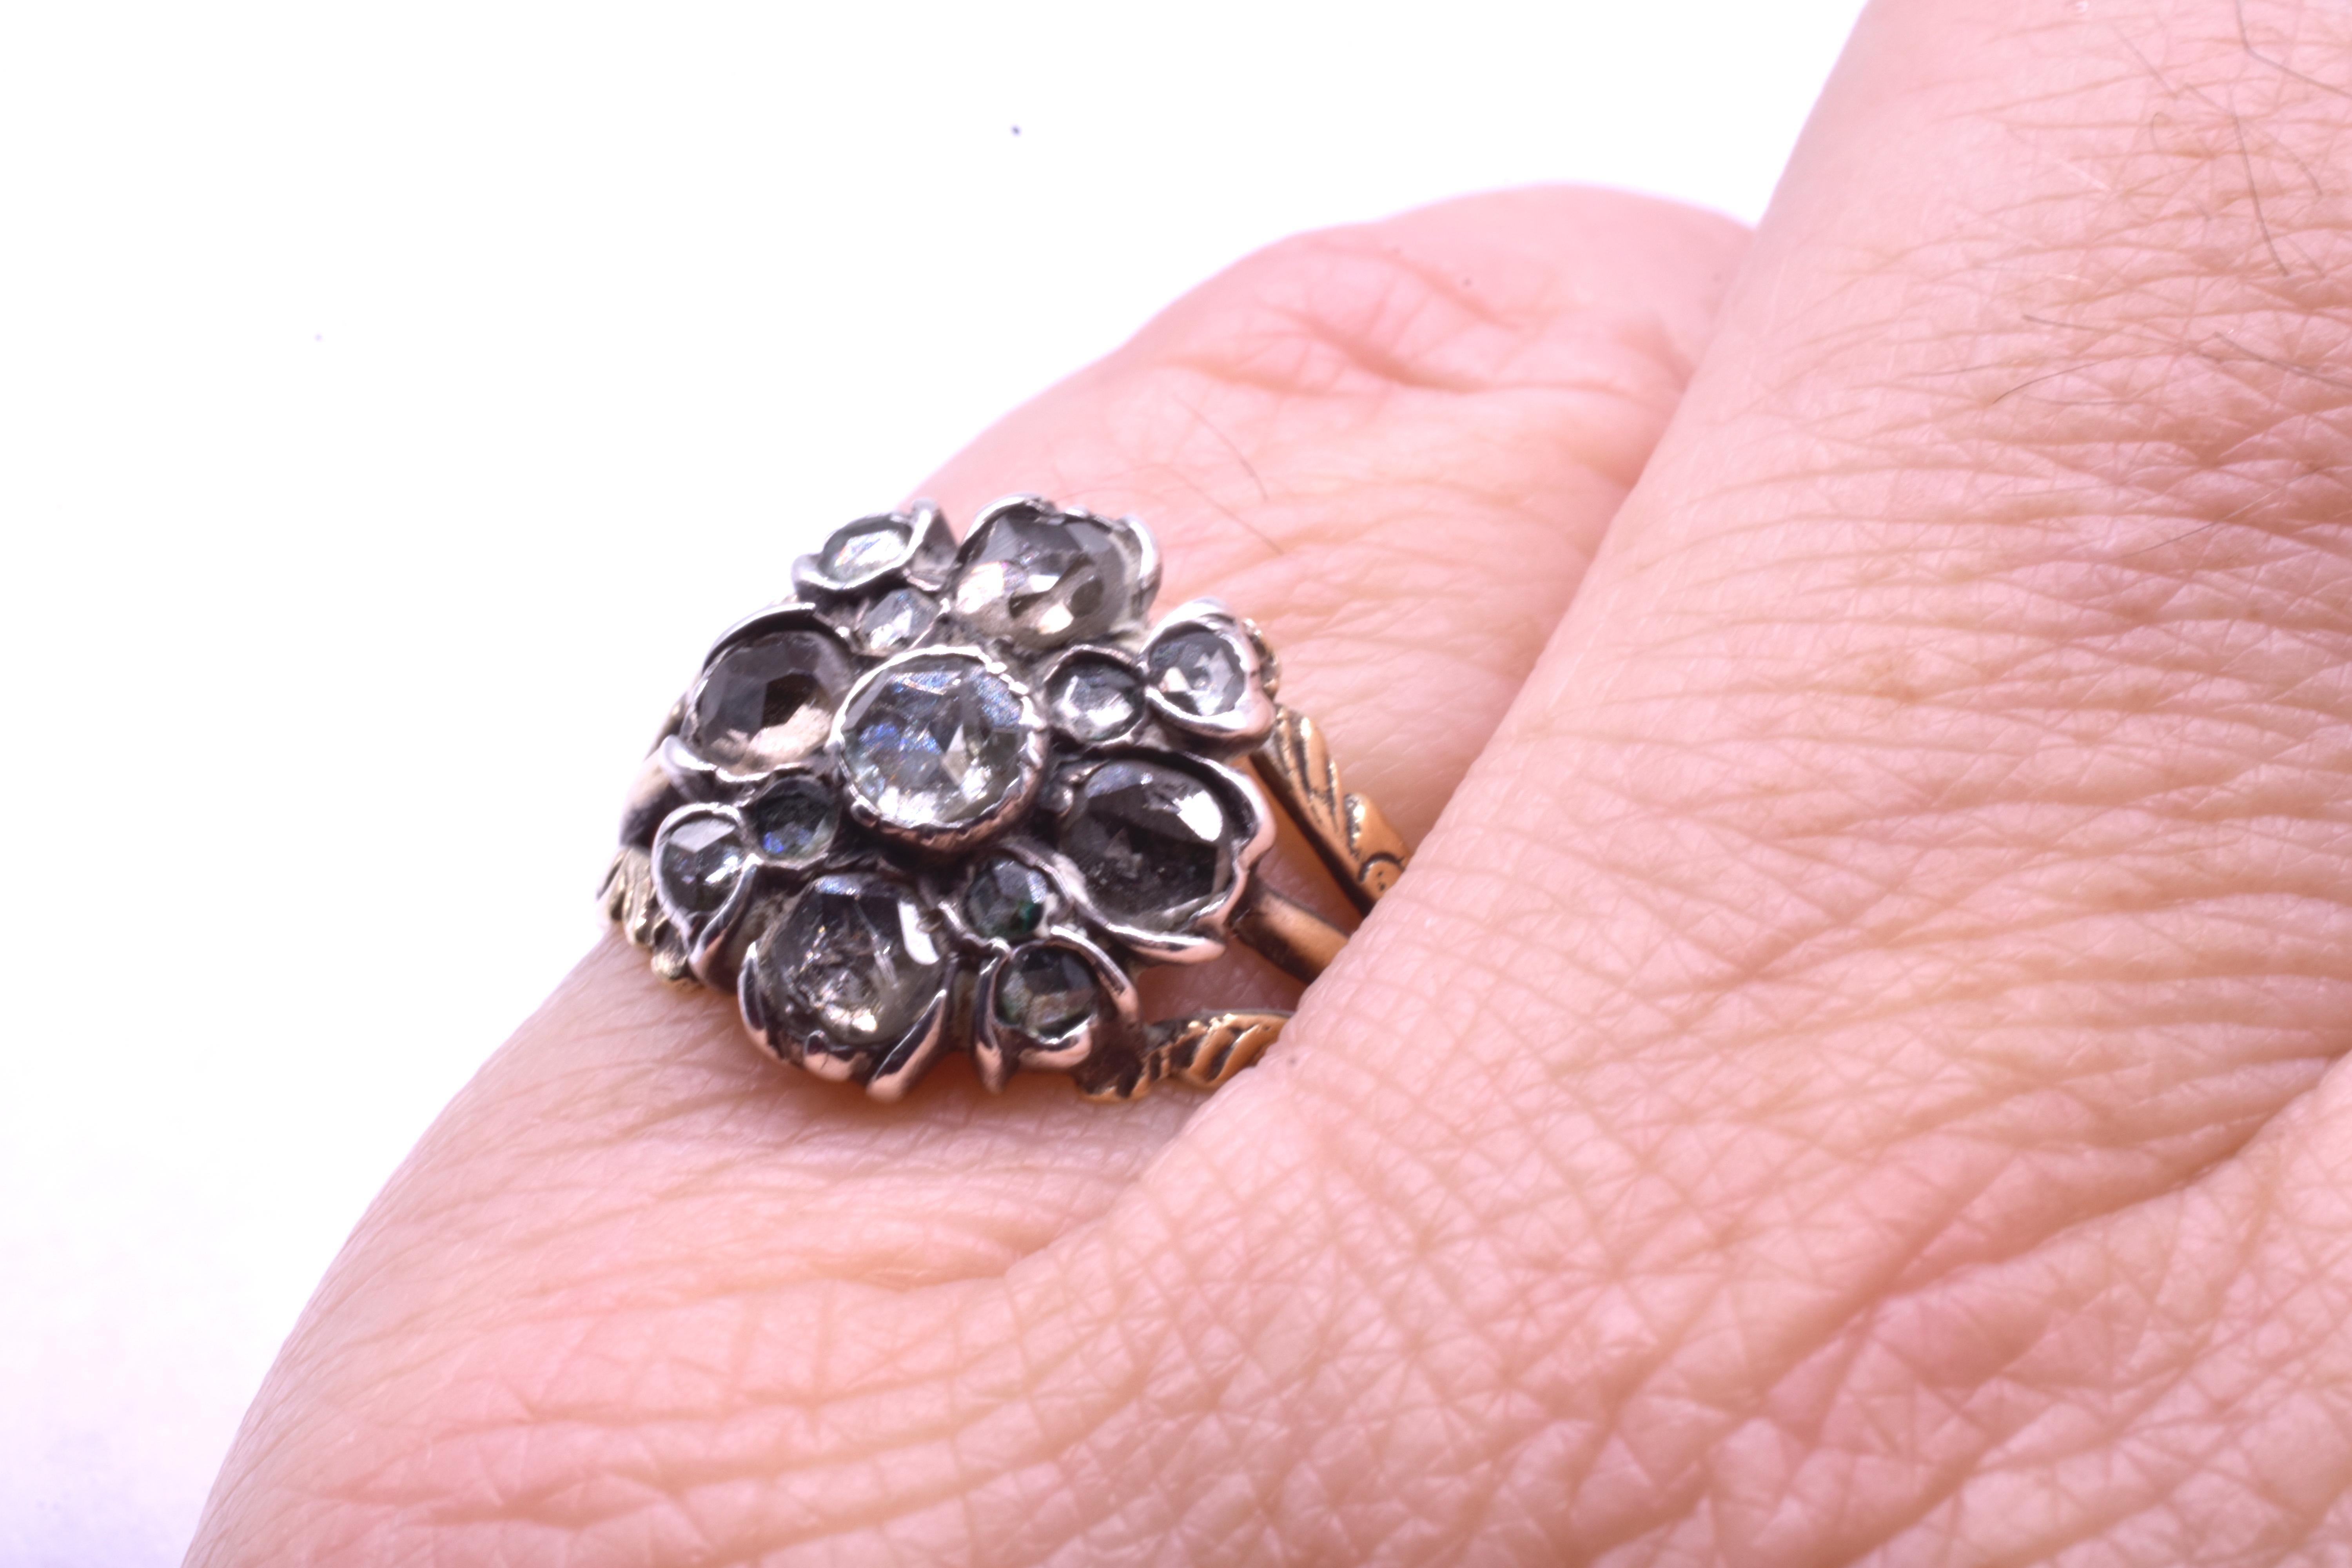 Early Georgian rose diamond cluster ring set in silver with an 18K gold embossed band. Rings of this period are very scarce and hard to find in such wonderful condition. This is a real collector's piece. The ring is size 6 and can be sized to fit.